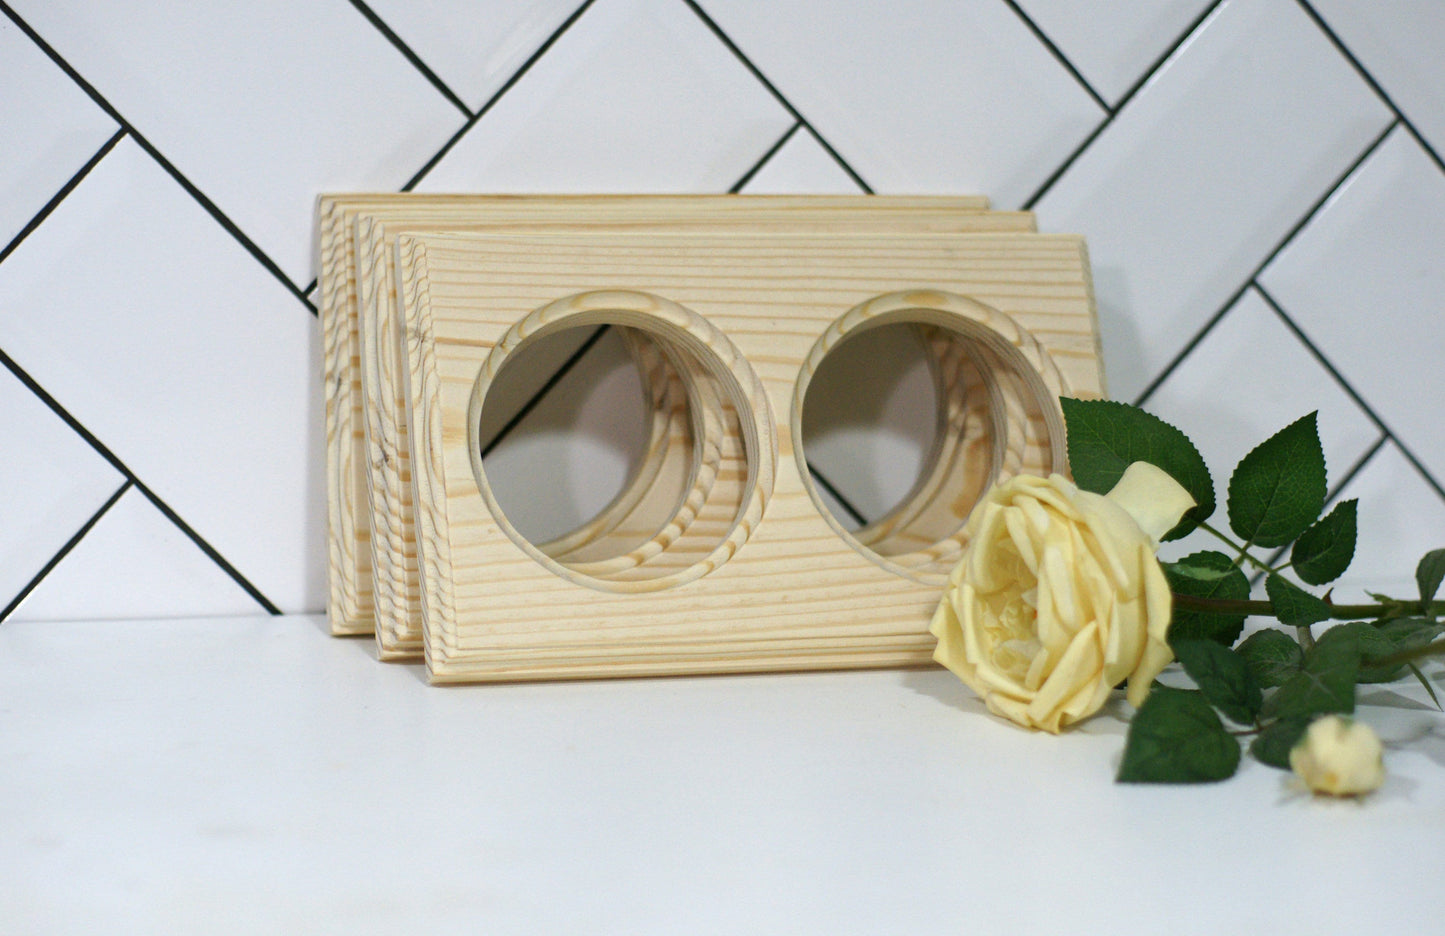 Distressed wedding photo frame, Distressed wood frame for photo, Individual handcrafted frame, Rustic double picture frame, Any color frame